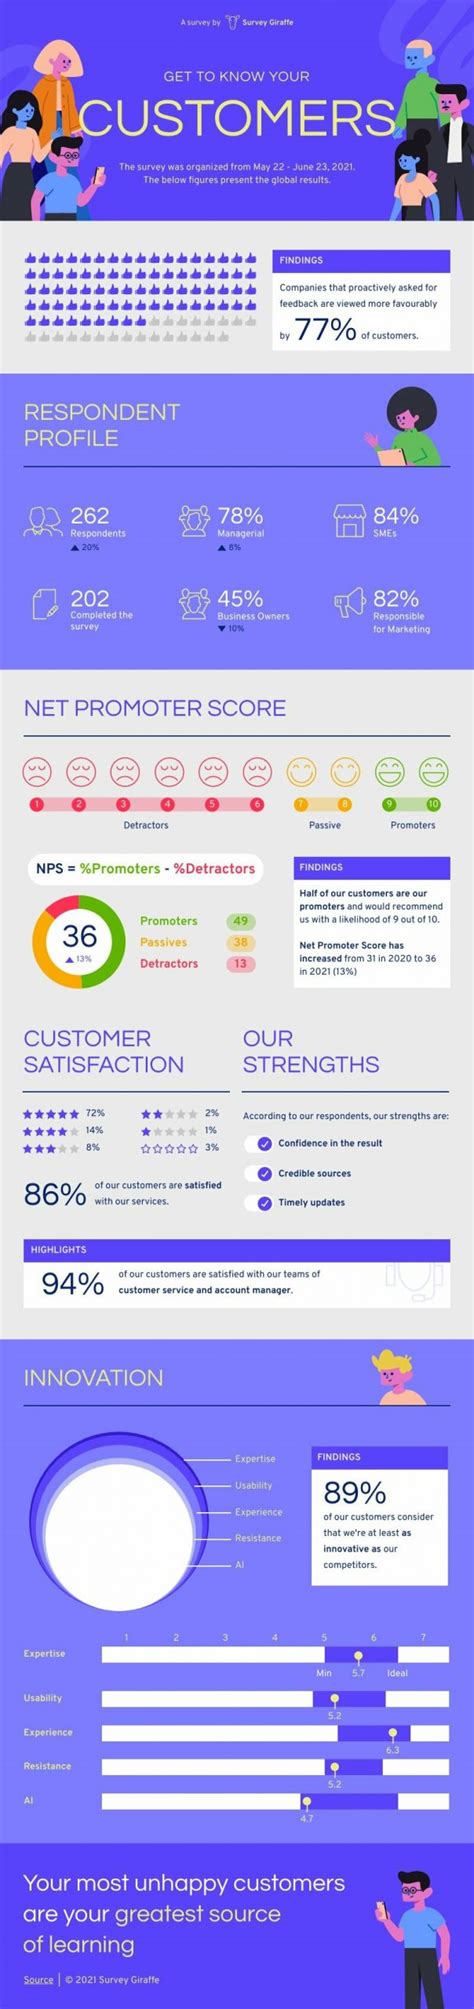 Free Customizable Survey Results Infographic Templates Piktochart